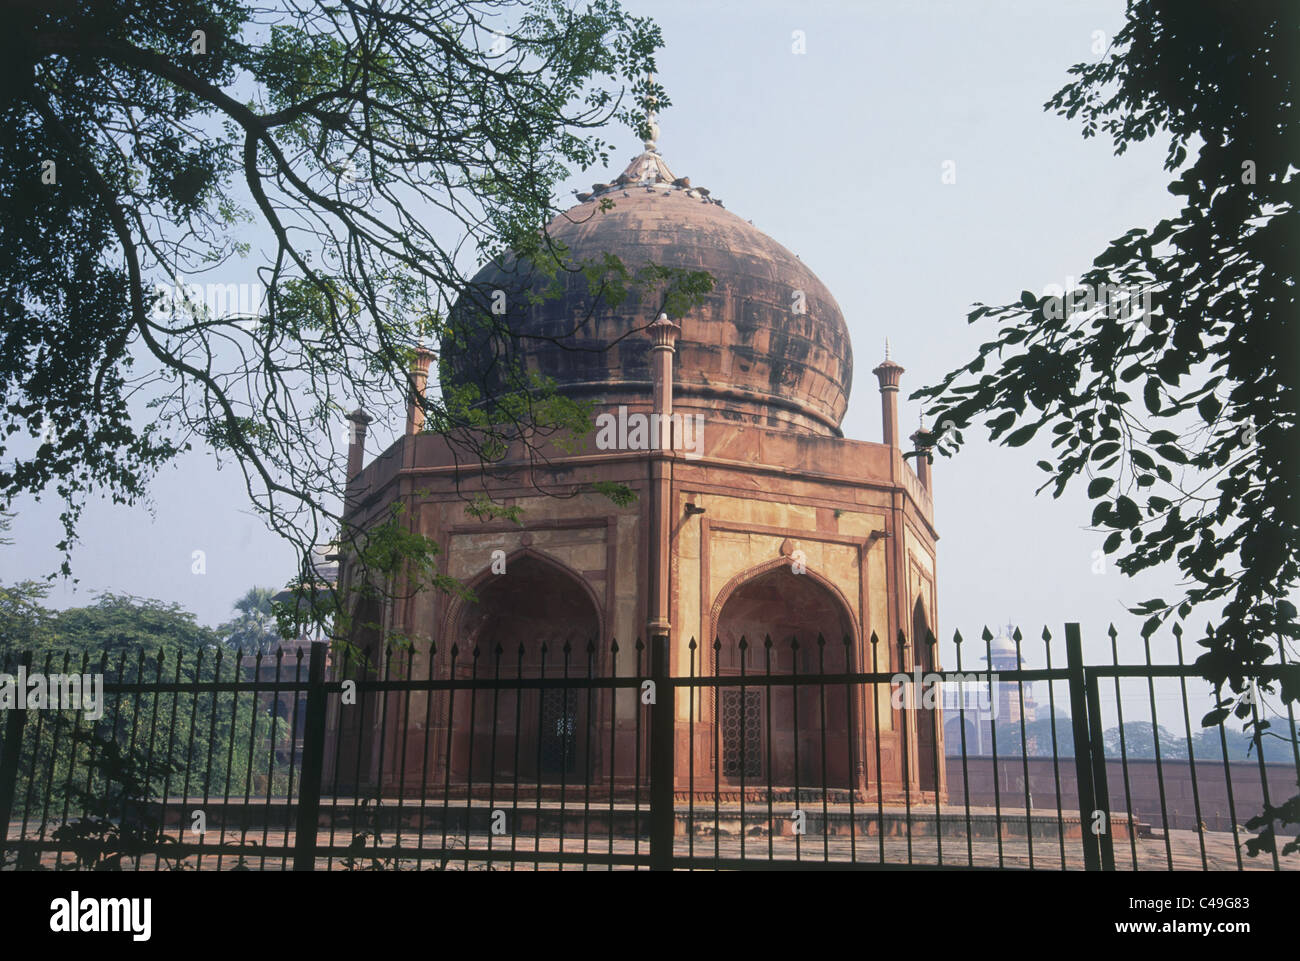 Photograph of part of the Taj Mahal in Agra India Stock Photo